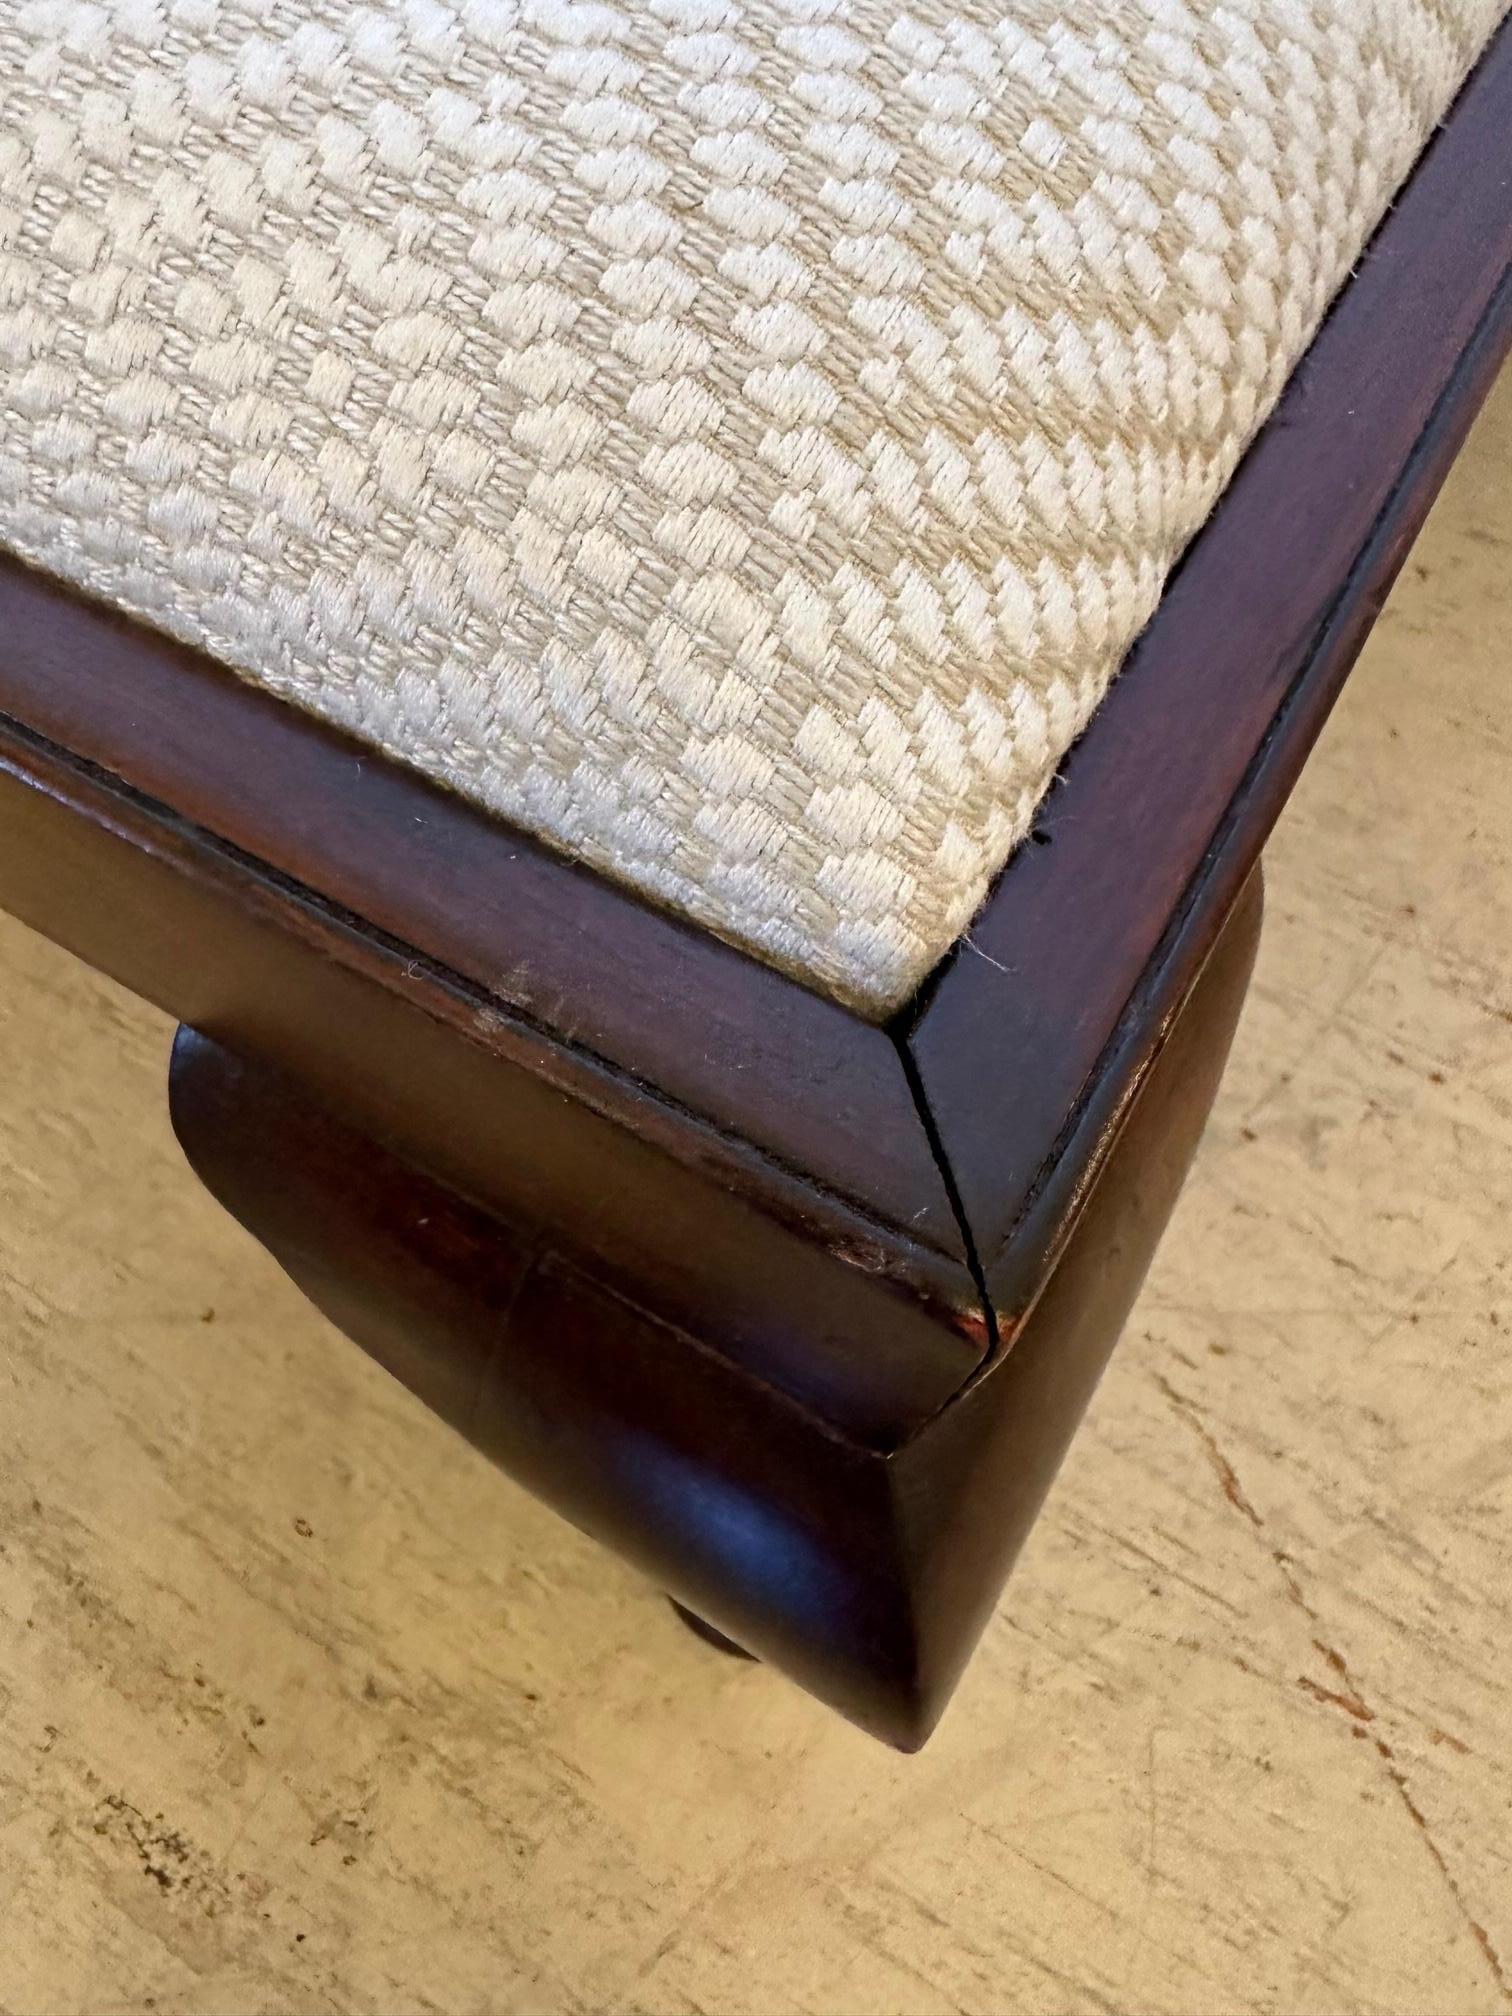 Handsome rectangular low to the ground antique footstool having dark wood base with stylishly flaired cabriole feet and new neutral geometric woven upholstery.